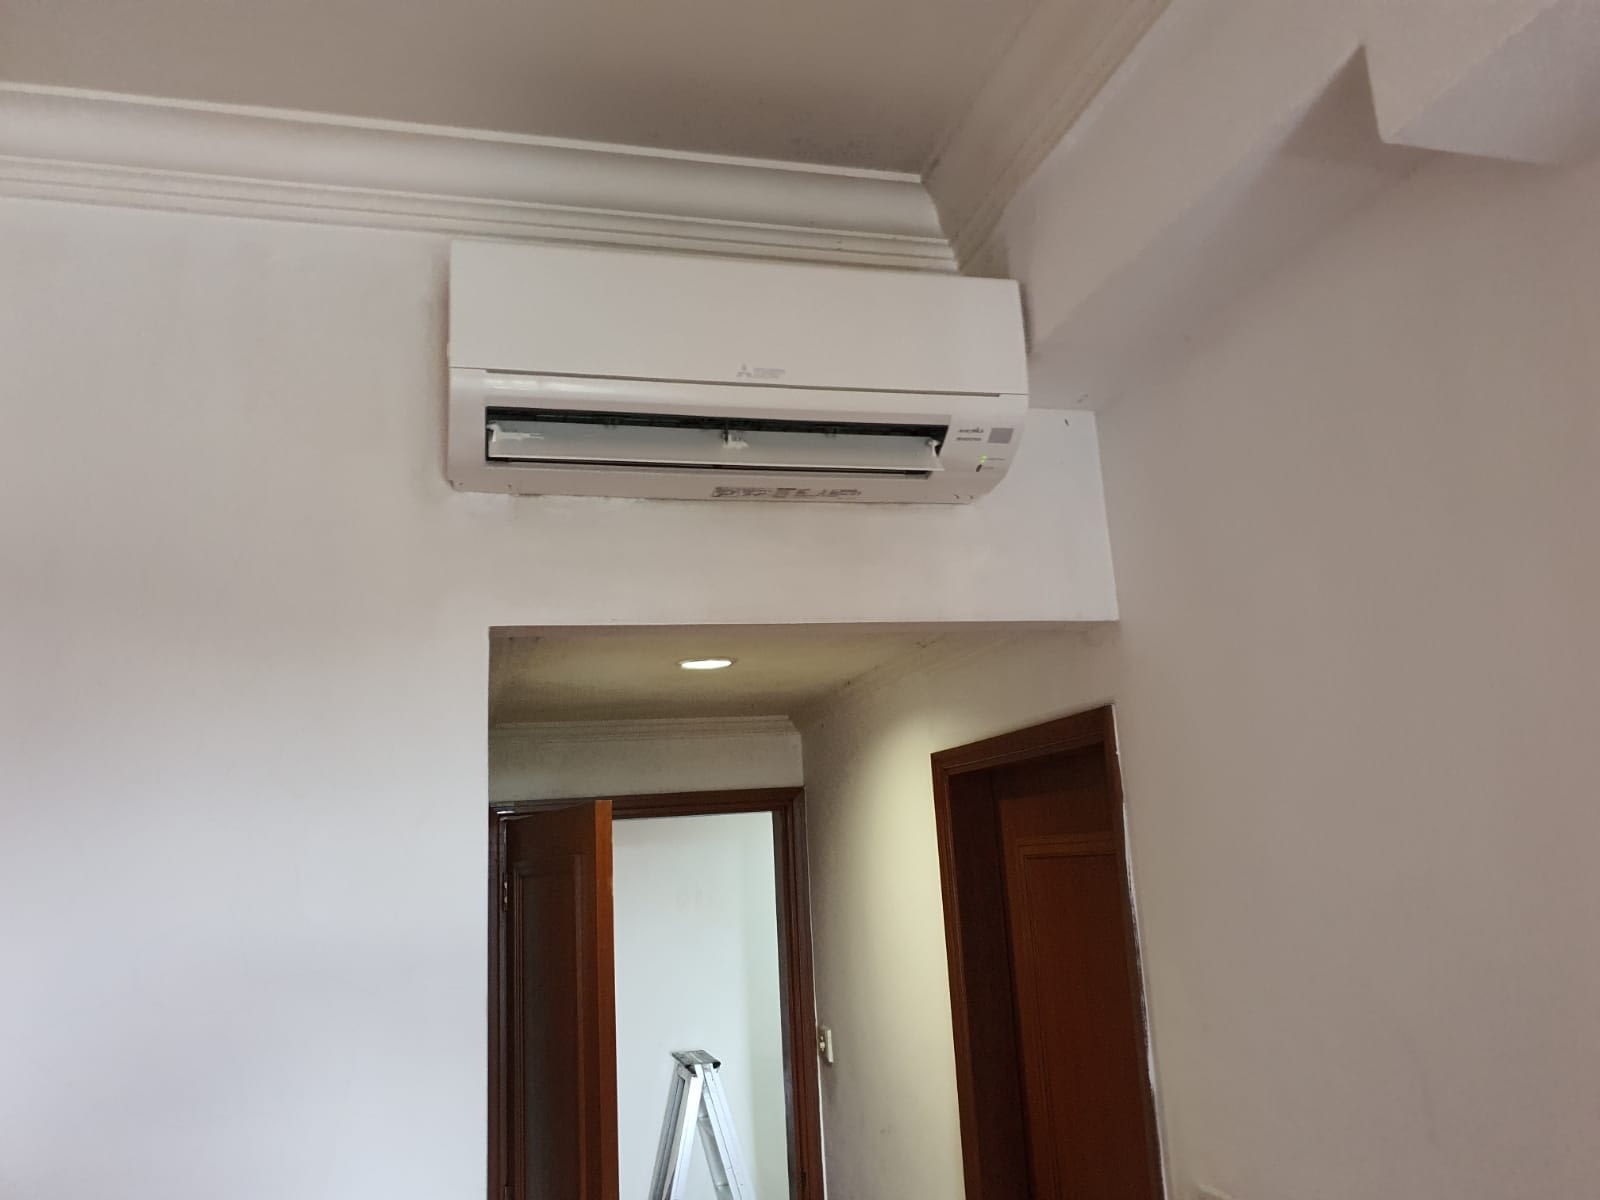 aircon maintenance in singapore